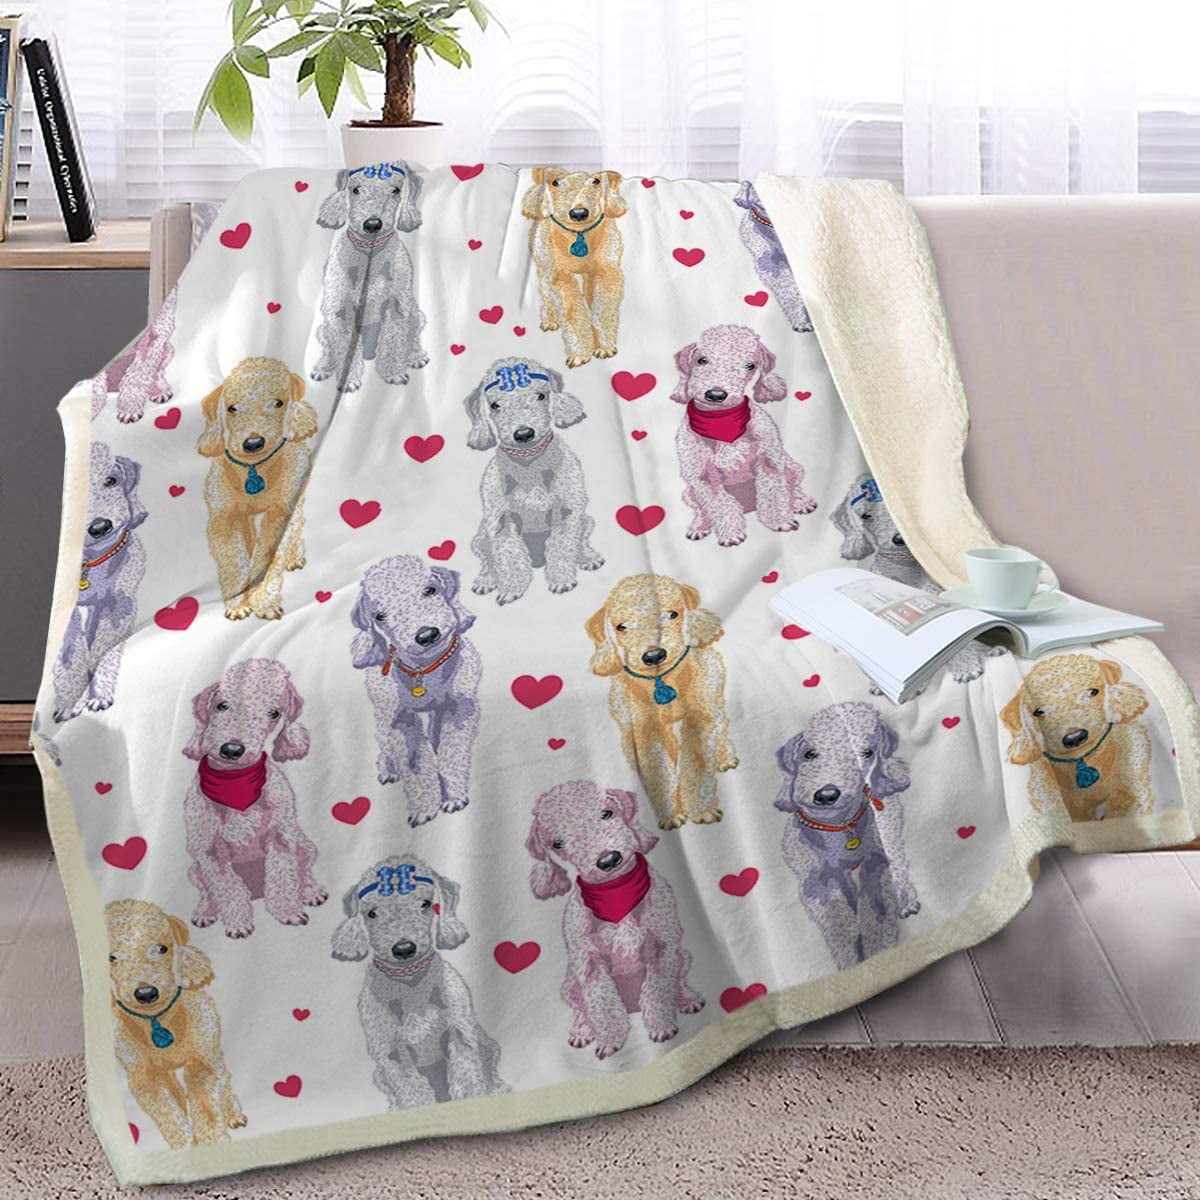 Throw, 50 x 60 Inches BlessLiving Shih Tzu Blanket Red Hearts Dog Fleece Plush Blanket Cute Puppy for Kids Adults 3D Animal Print Sherpa Blanket Gift for Pet Lovers 